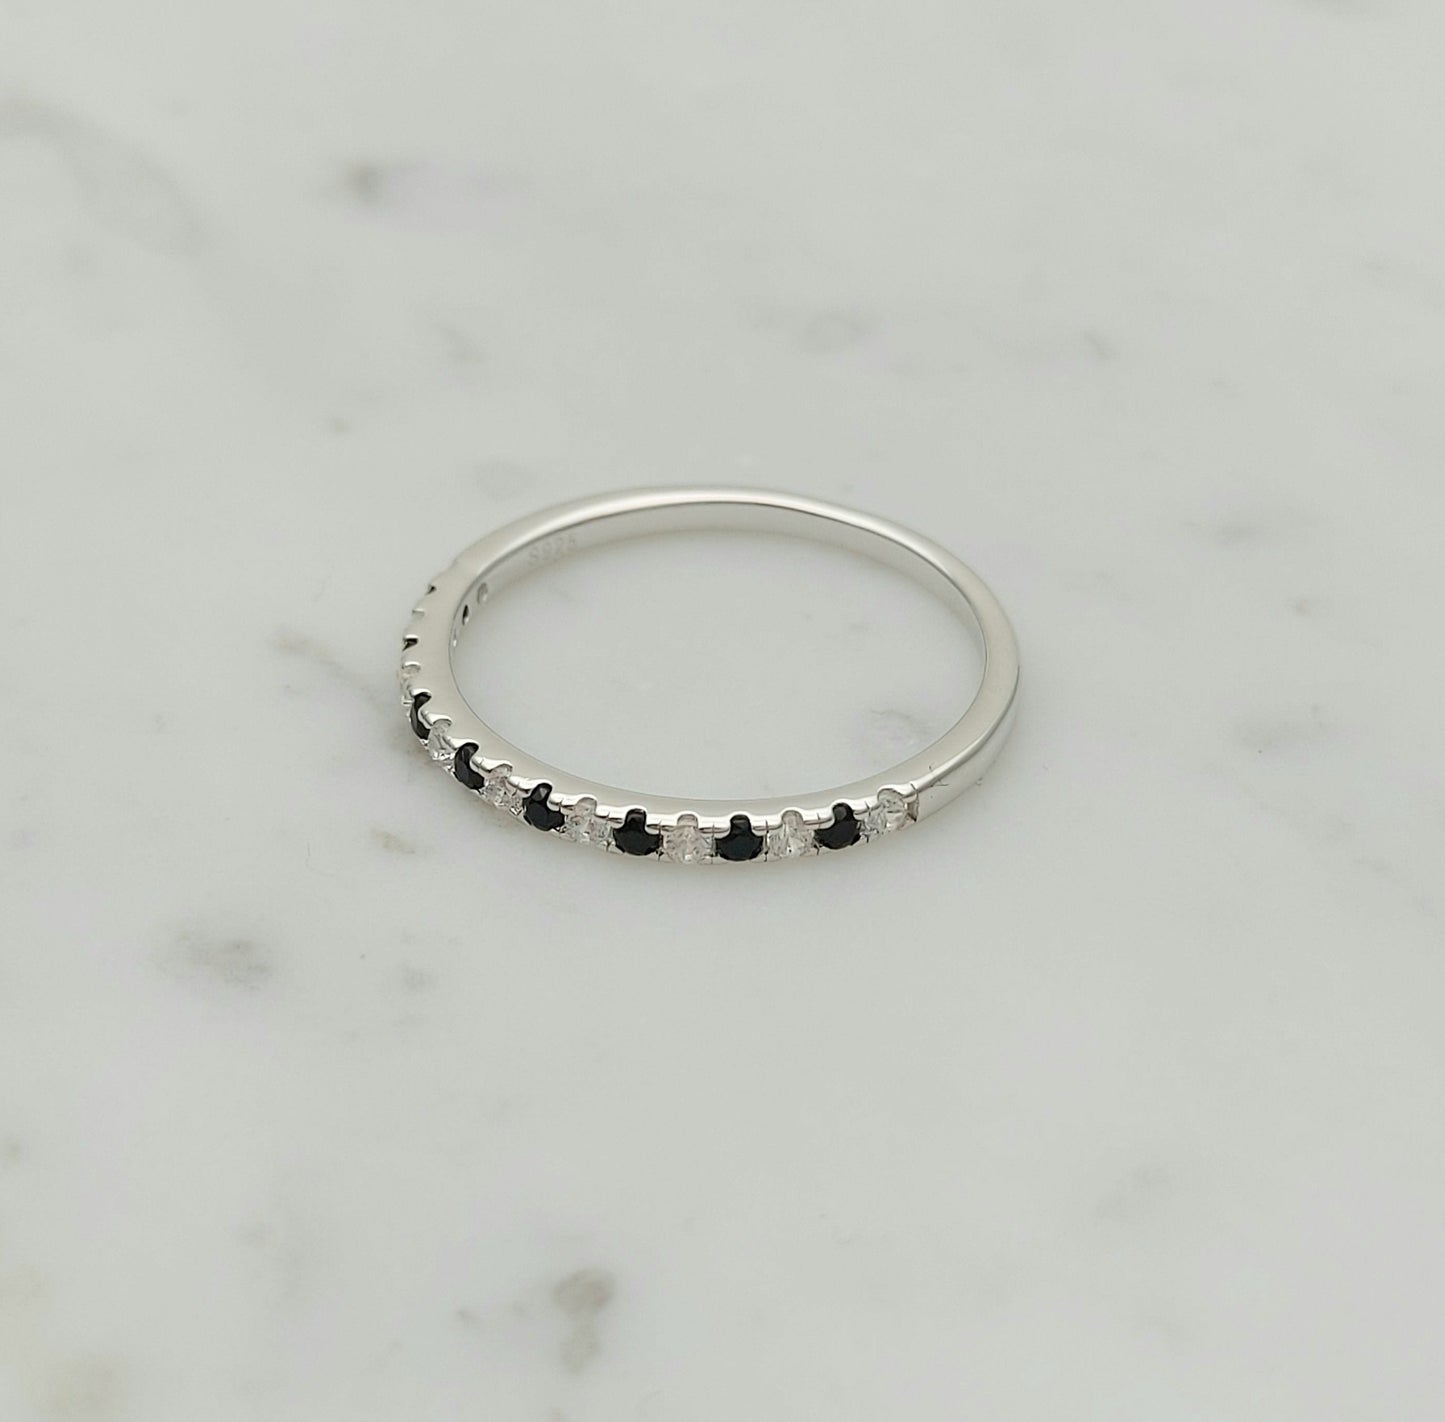 1.8mm wide Onyx & Man Made Diamond Simulant Half Eternity ring  in white gold or Silver - stacking ring - wedding band